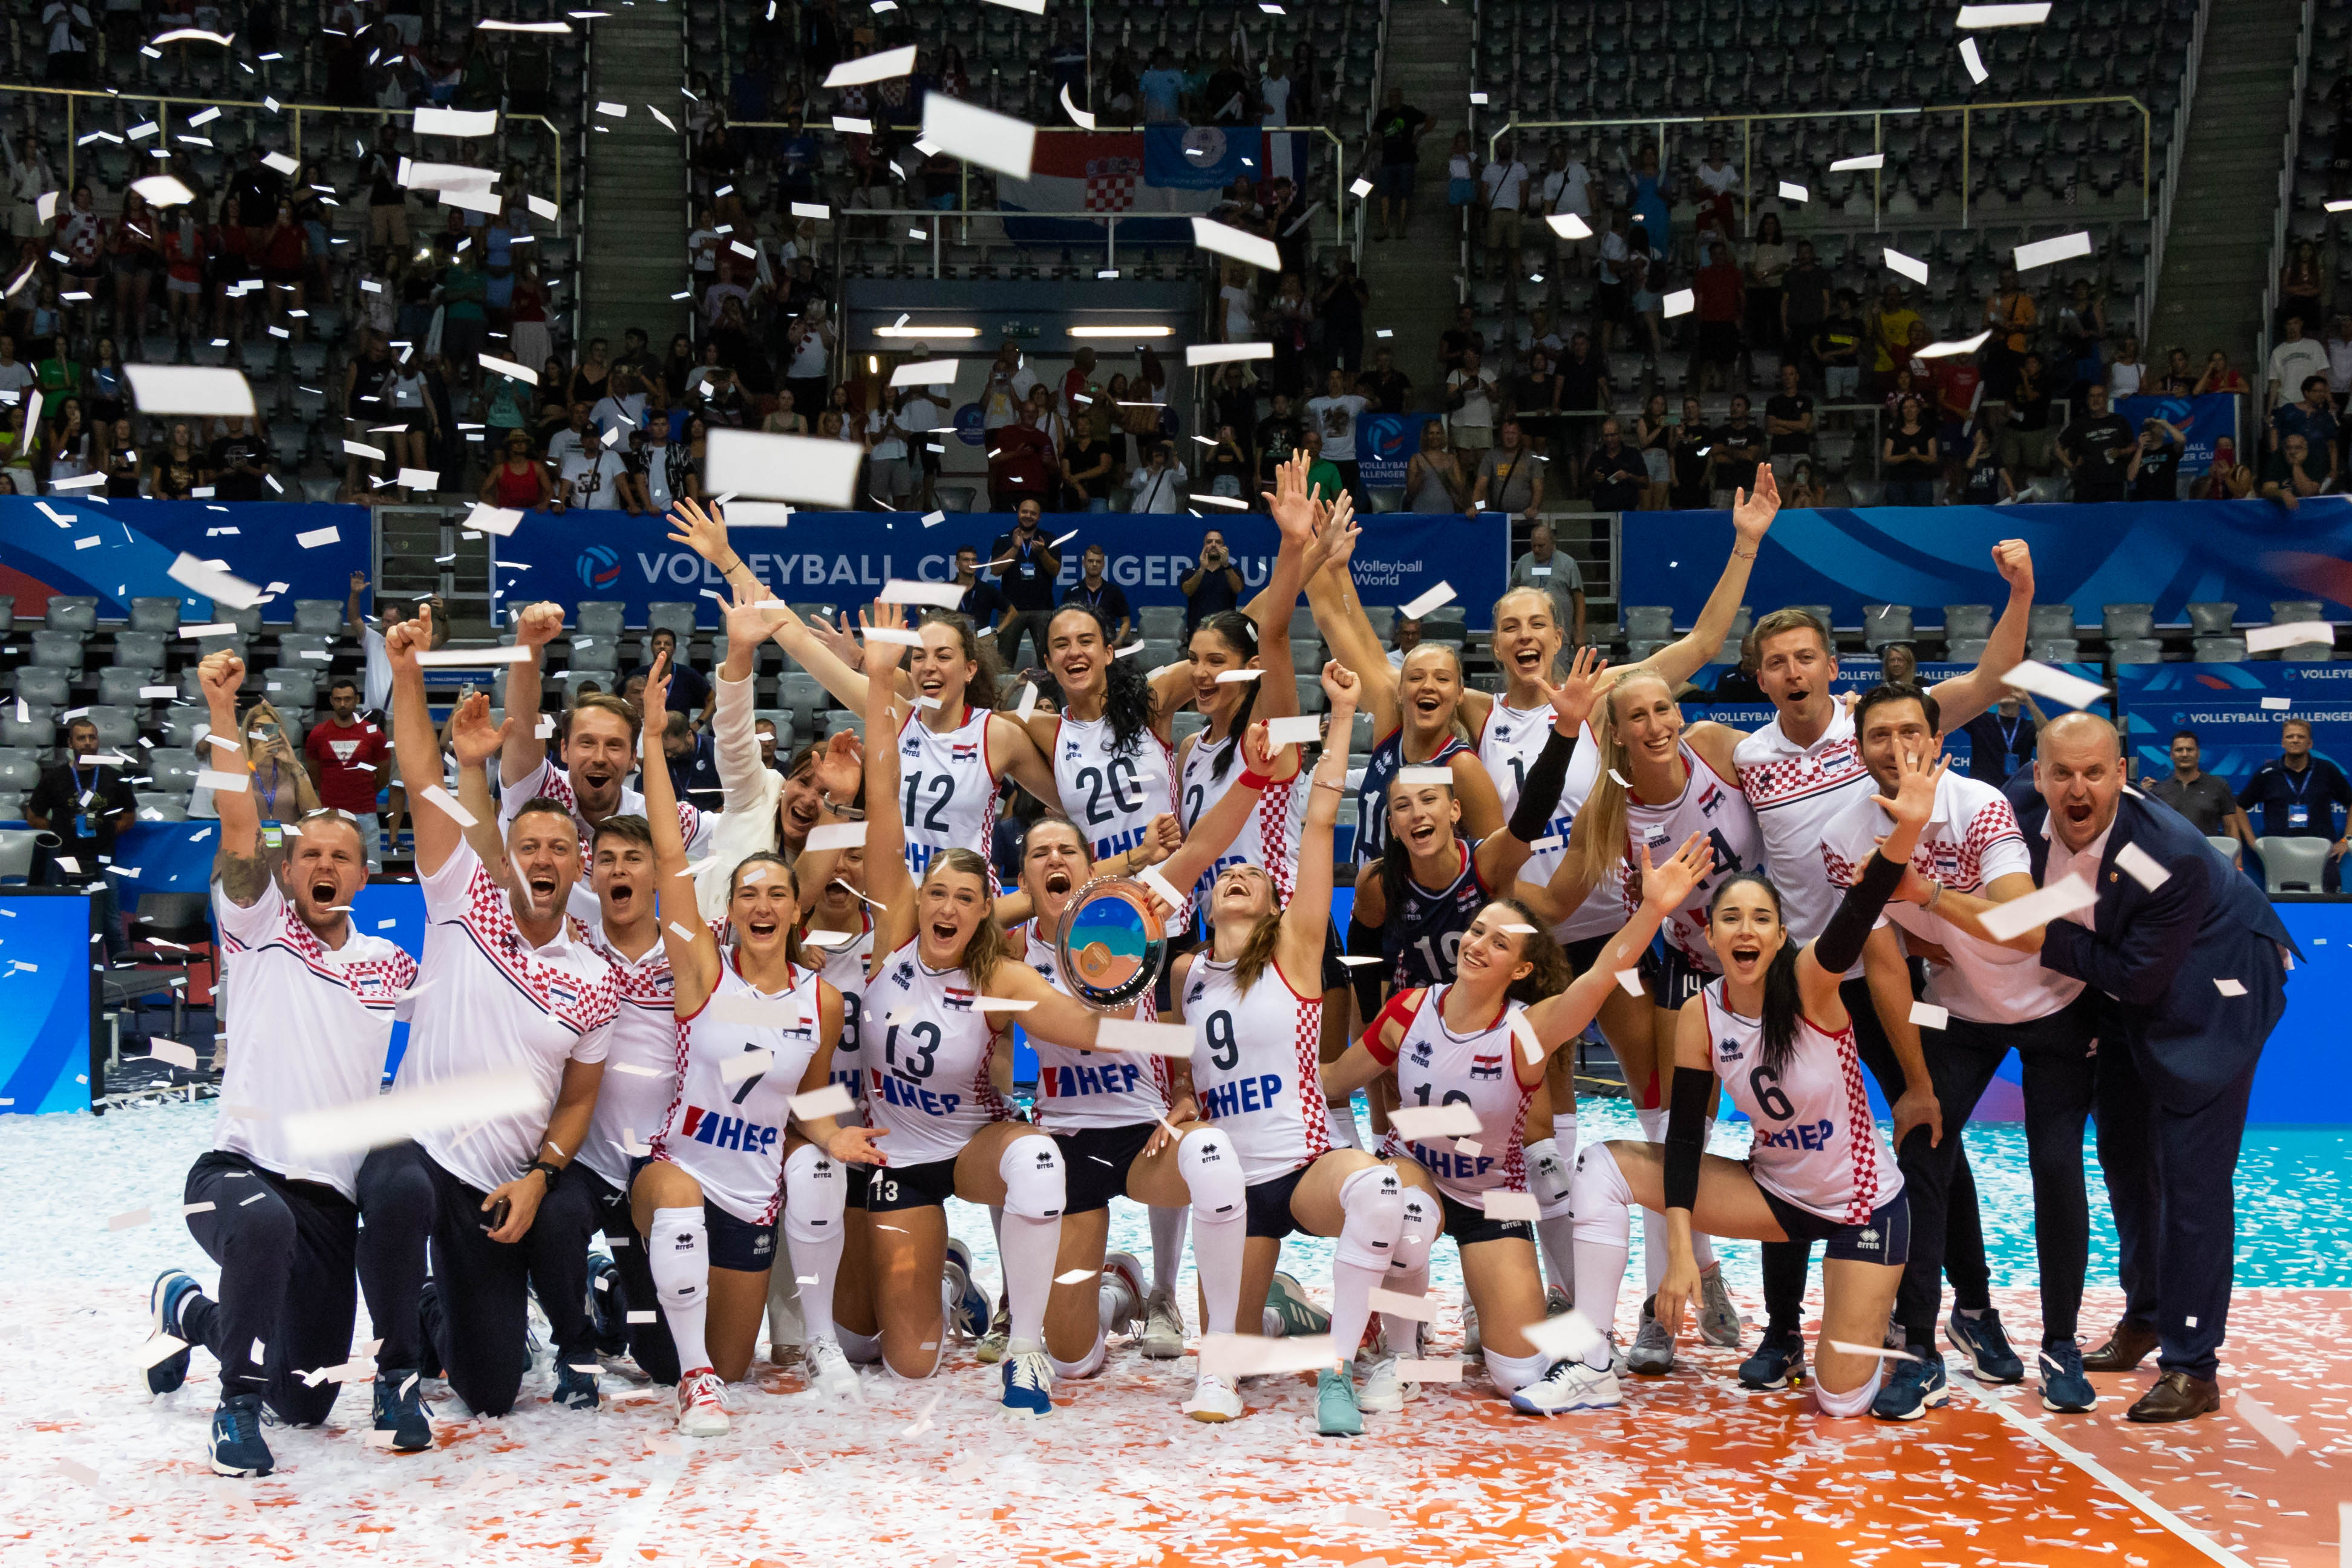 Year in Review Croatia and Cuba win historic Volleyball Challenger Cup titles volleyballworld